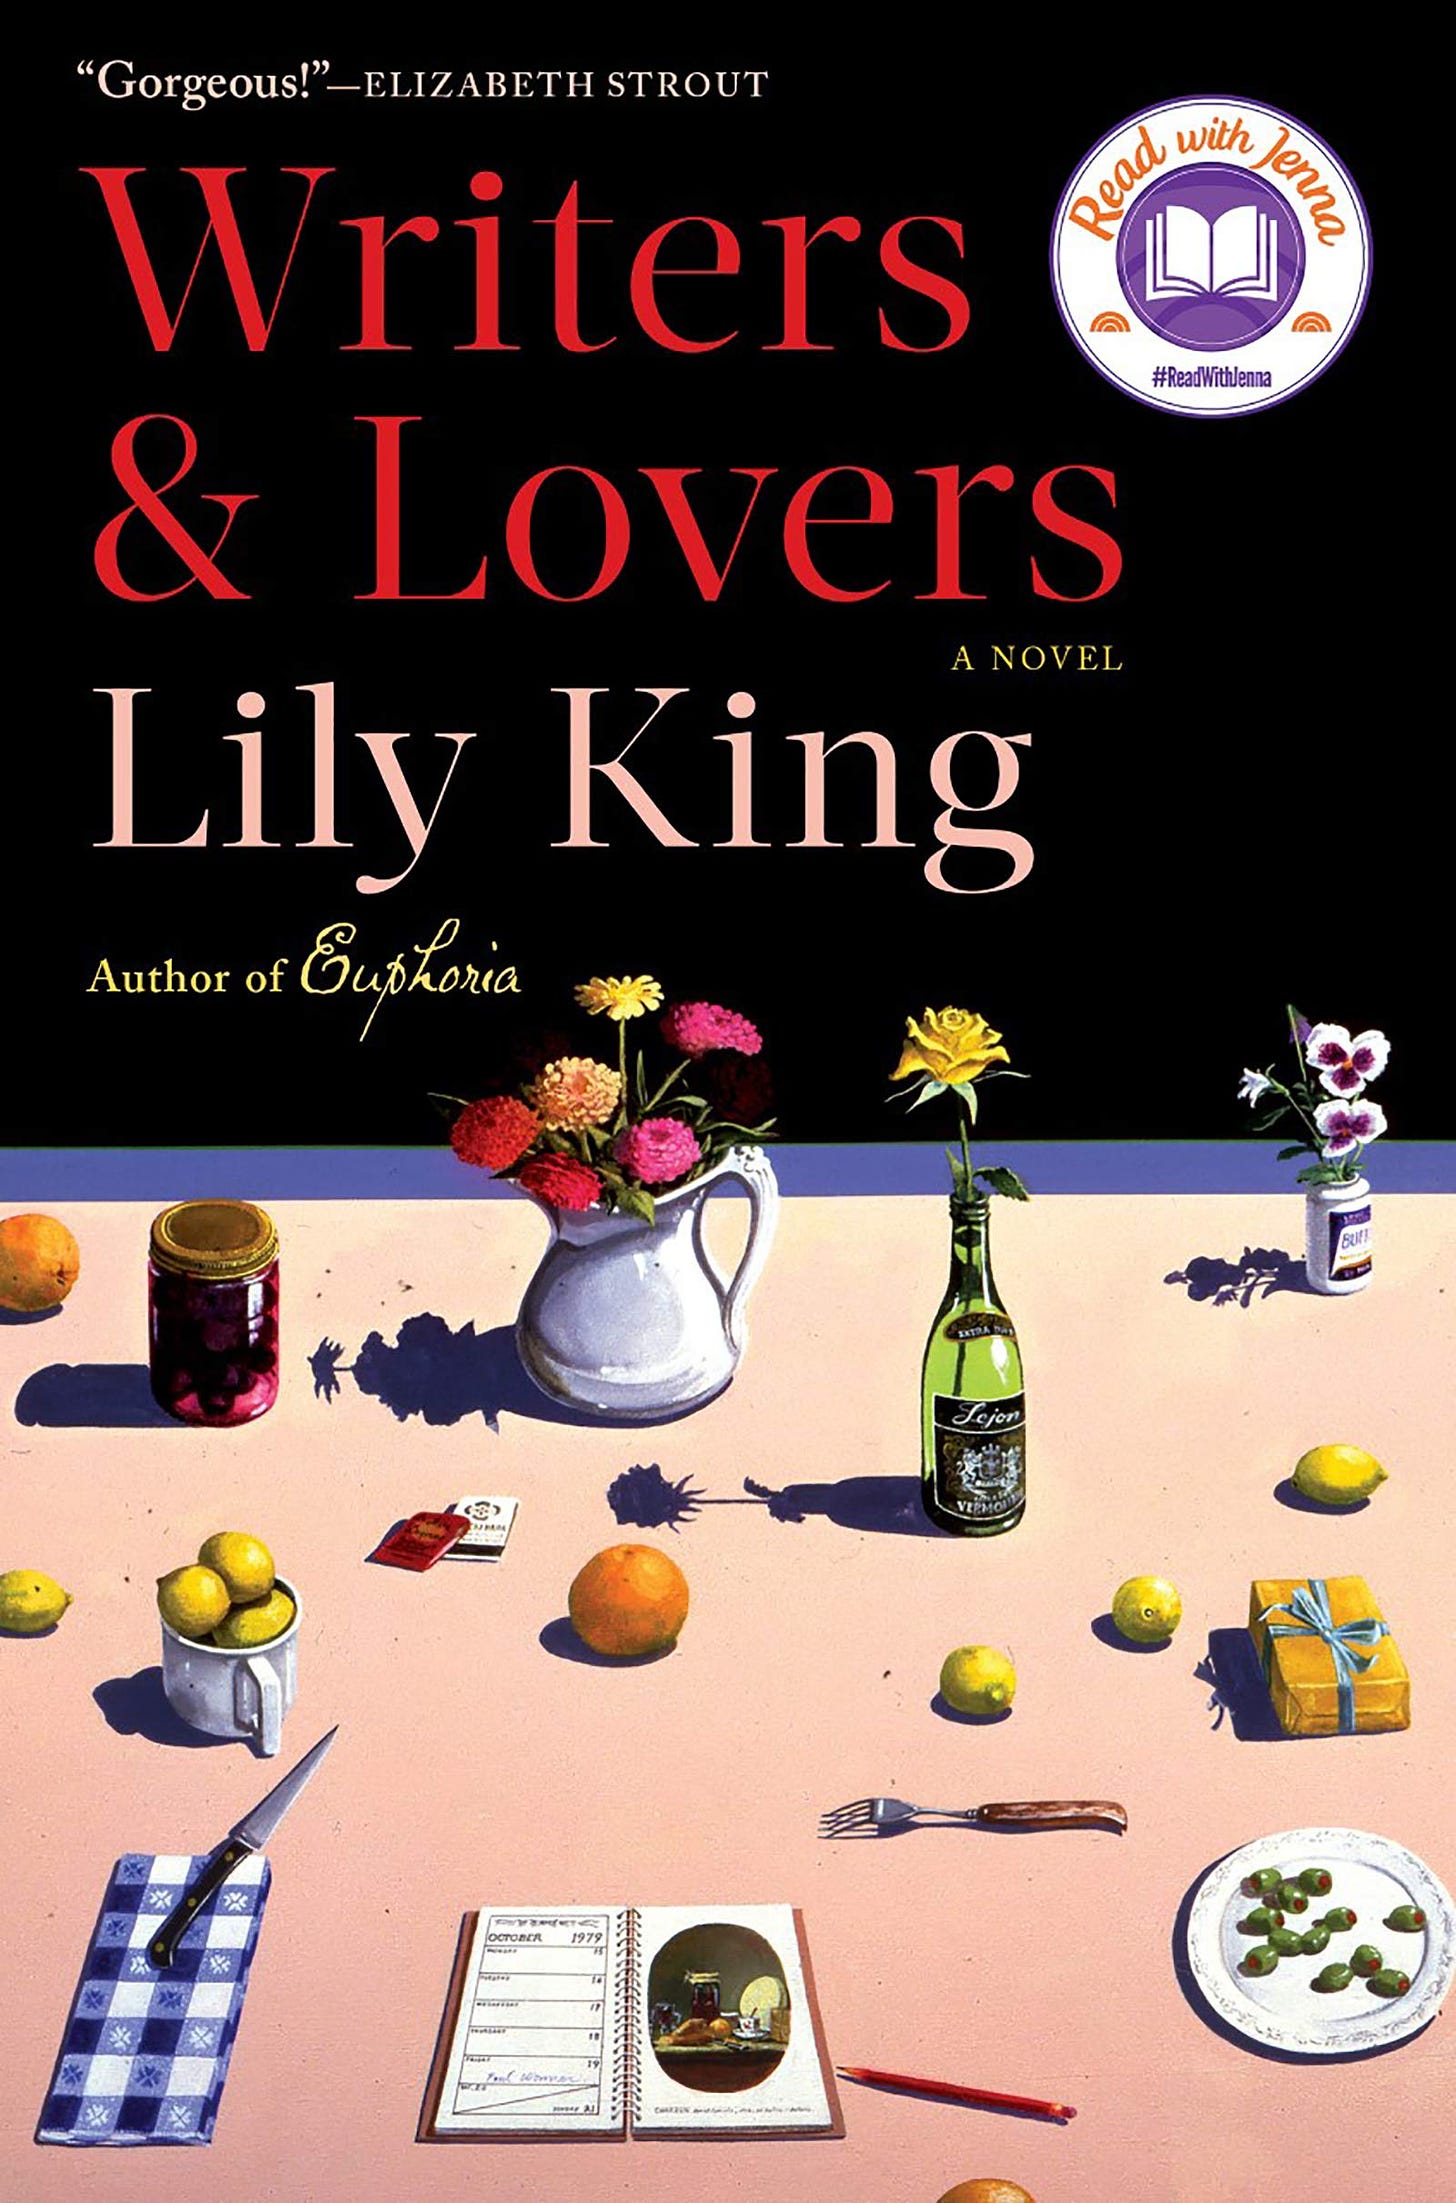 Writers &amp; Lovers: A Novel: King, Lily: 9780802148537: Amazon.com: Books